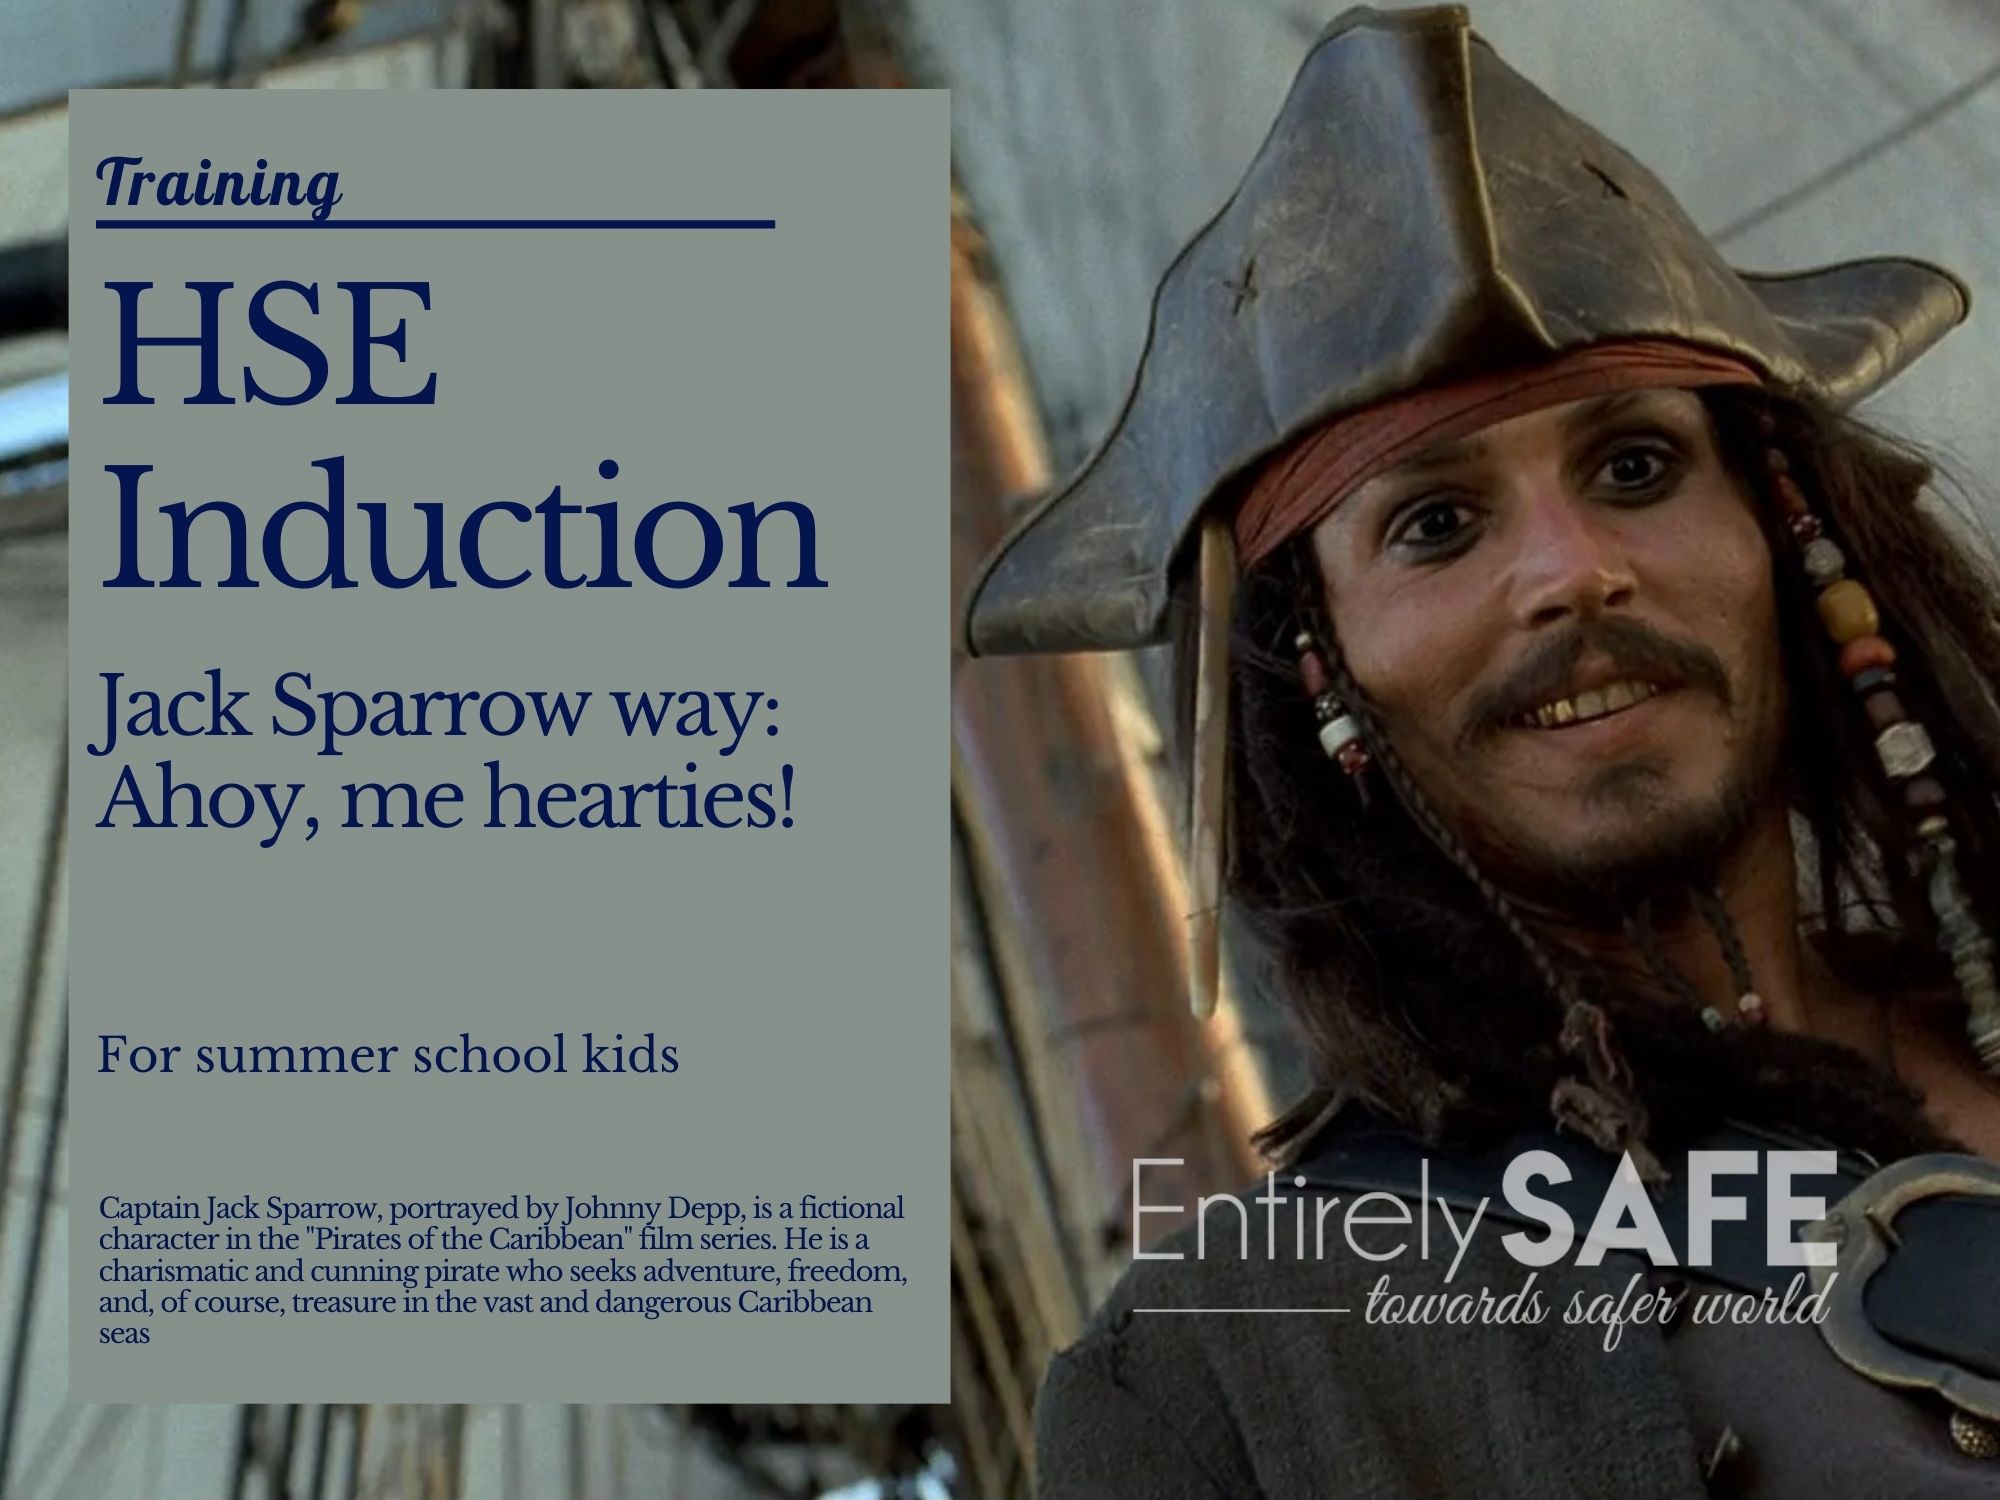 HSE Introduction Jack Sparrow way for Summer School Kids